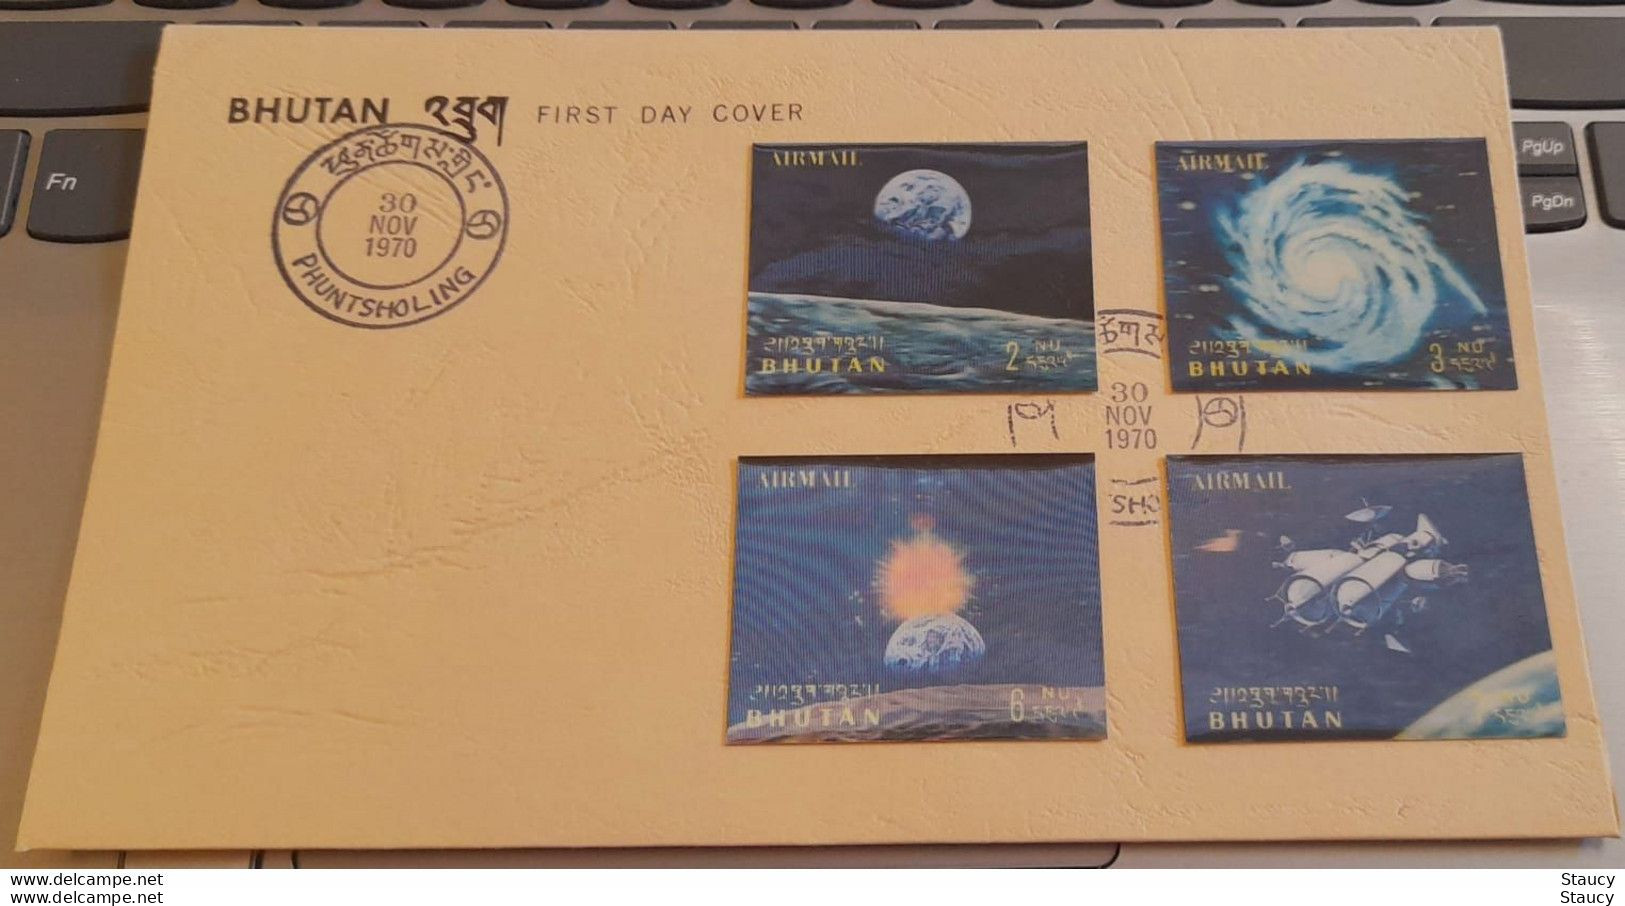 BHUTAN 1969 Manned Apollo 11 3-D Stamps 4v FDC, As Per Scan - Asia